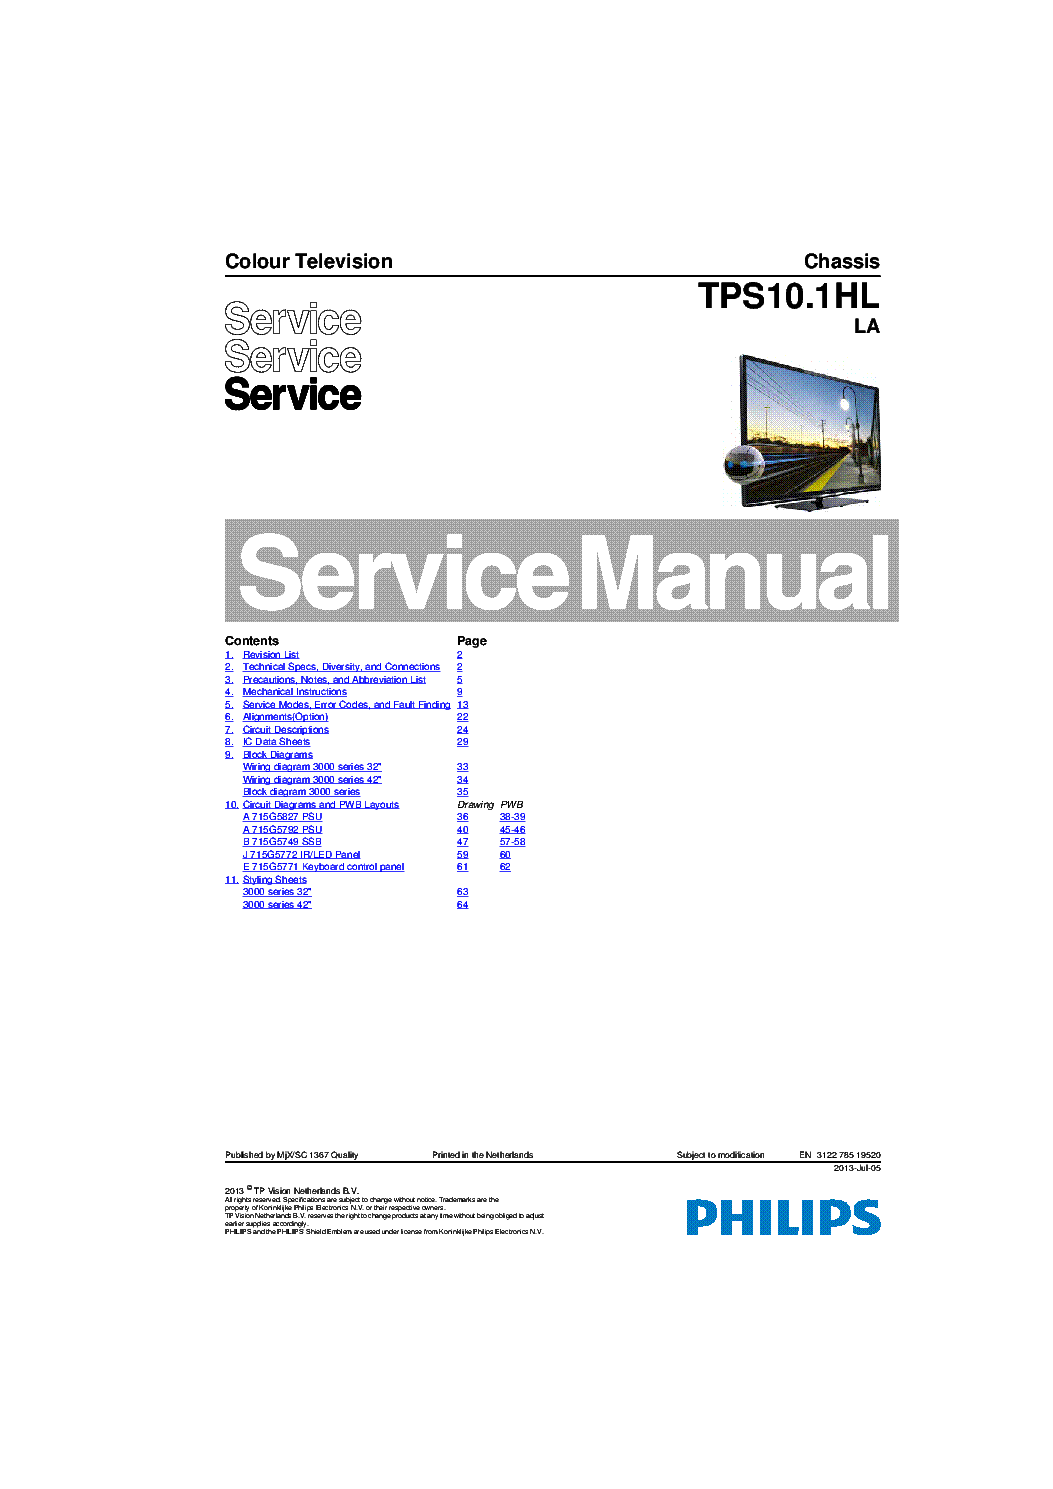 PHILIPS TPS10.1HLLA 312278519520 130705 service manual (1st page)